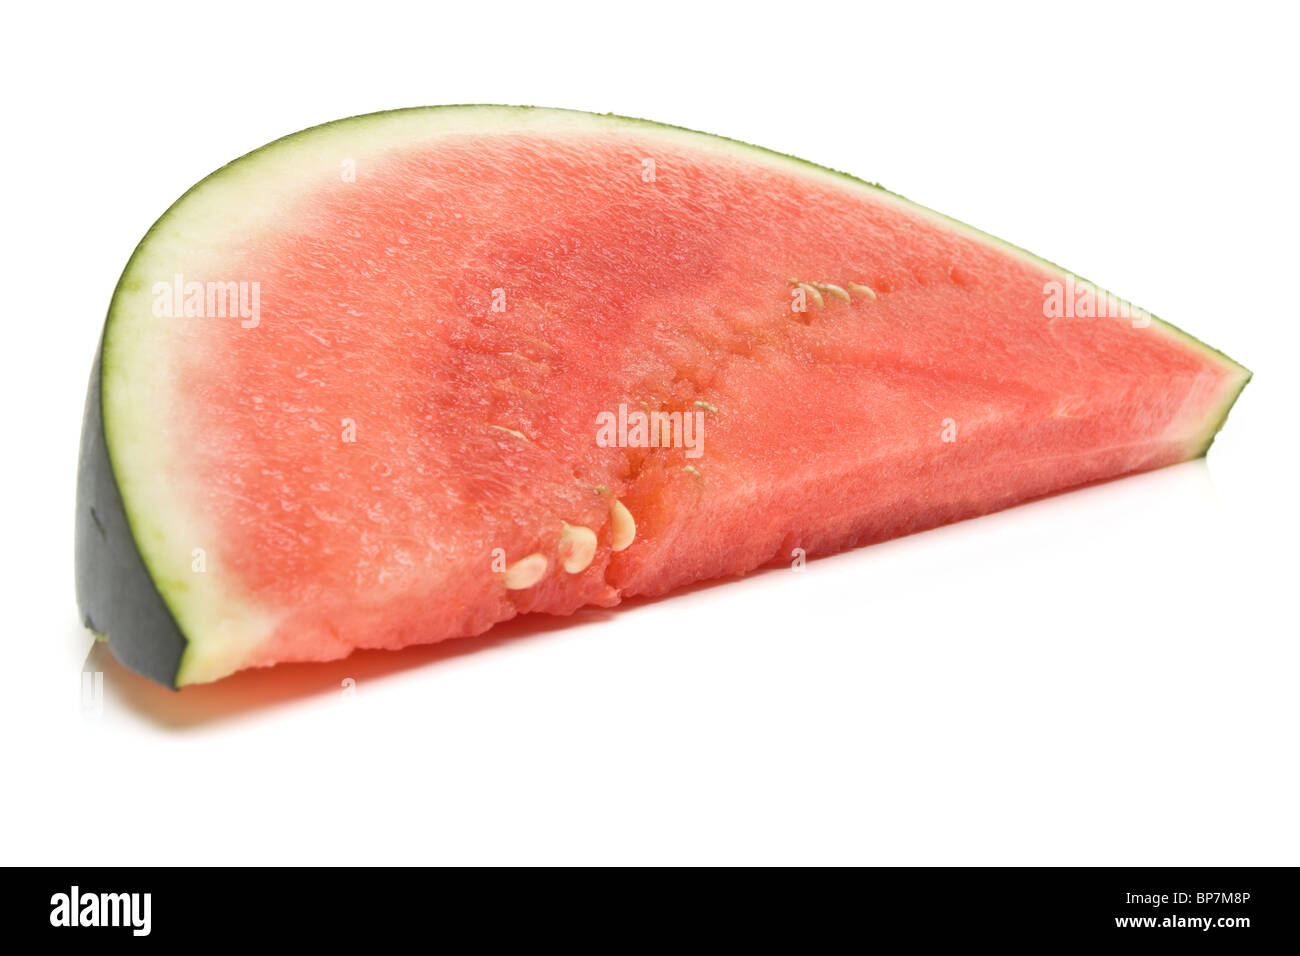 Abstract image of Watermelon close up from low perspective. Stock Photo